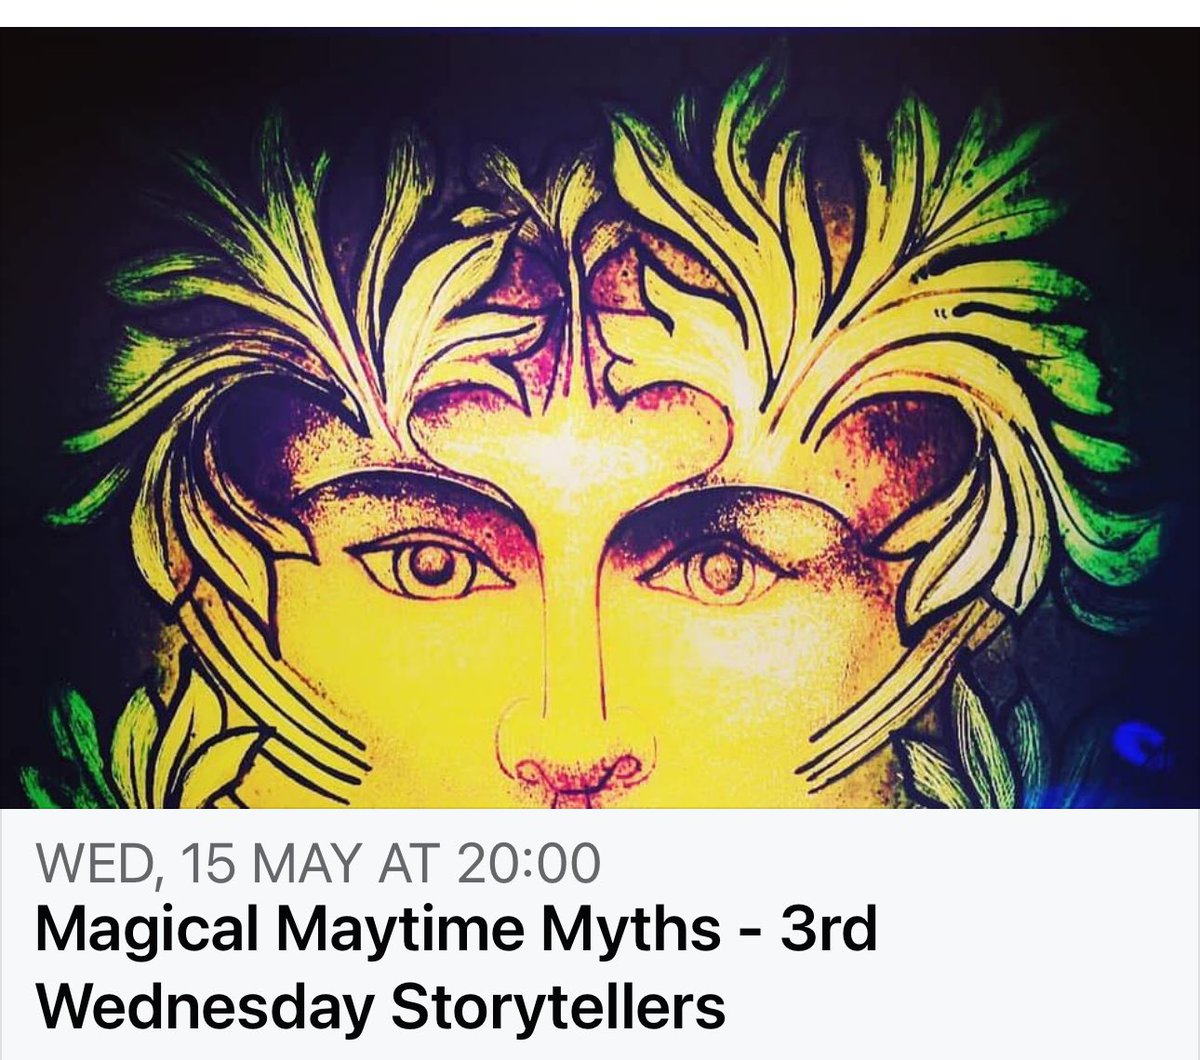 Online storytelling to you wherever you are around the world. Join us to listen to stories and sink into the land of myth and stories #storyteller #storytelling #myth #magic #mystery #folk #folklore #fantasy #fiction #spokenword #witch #greenman #greenwoman #fae #fairy